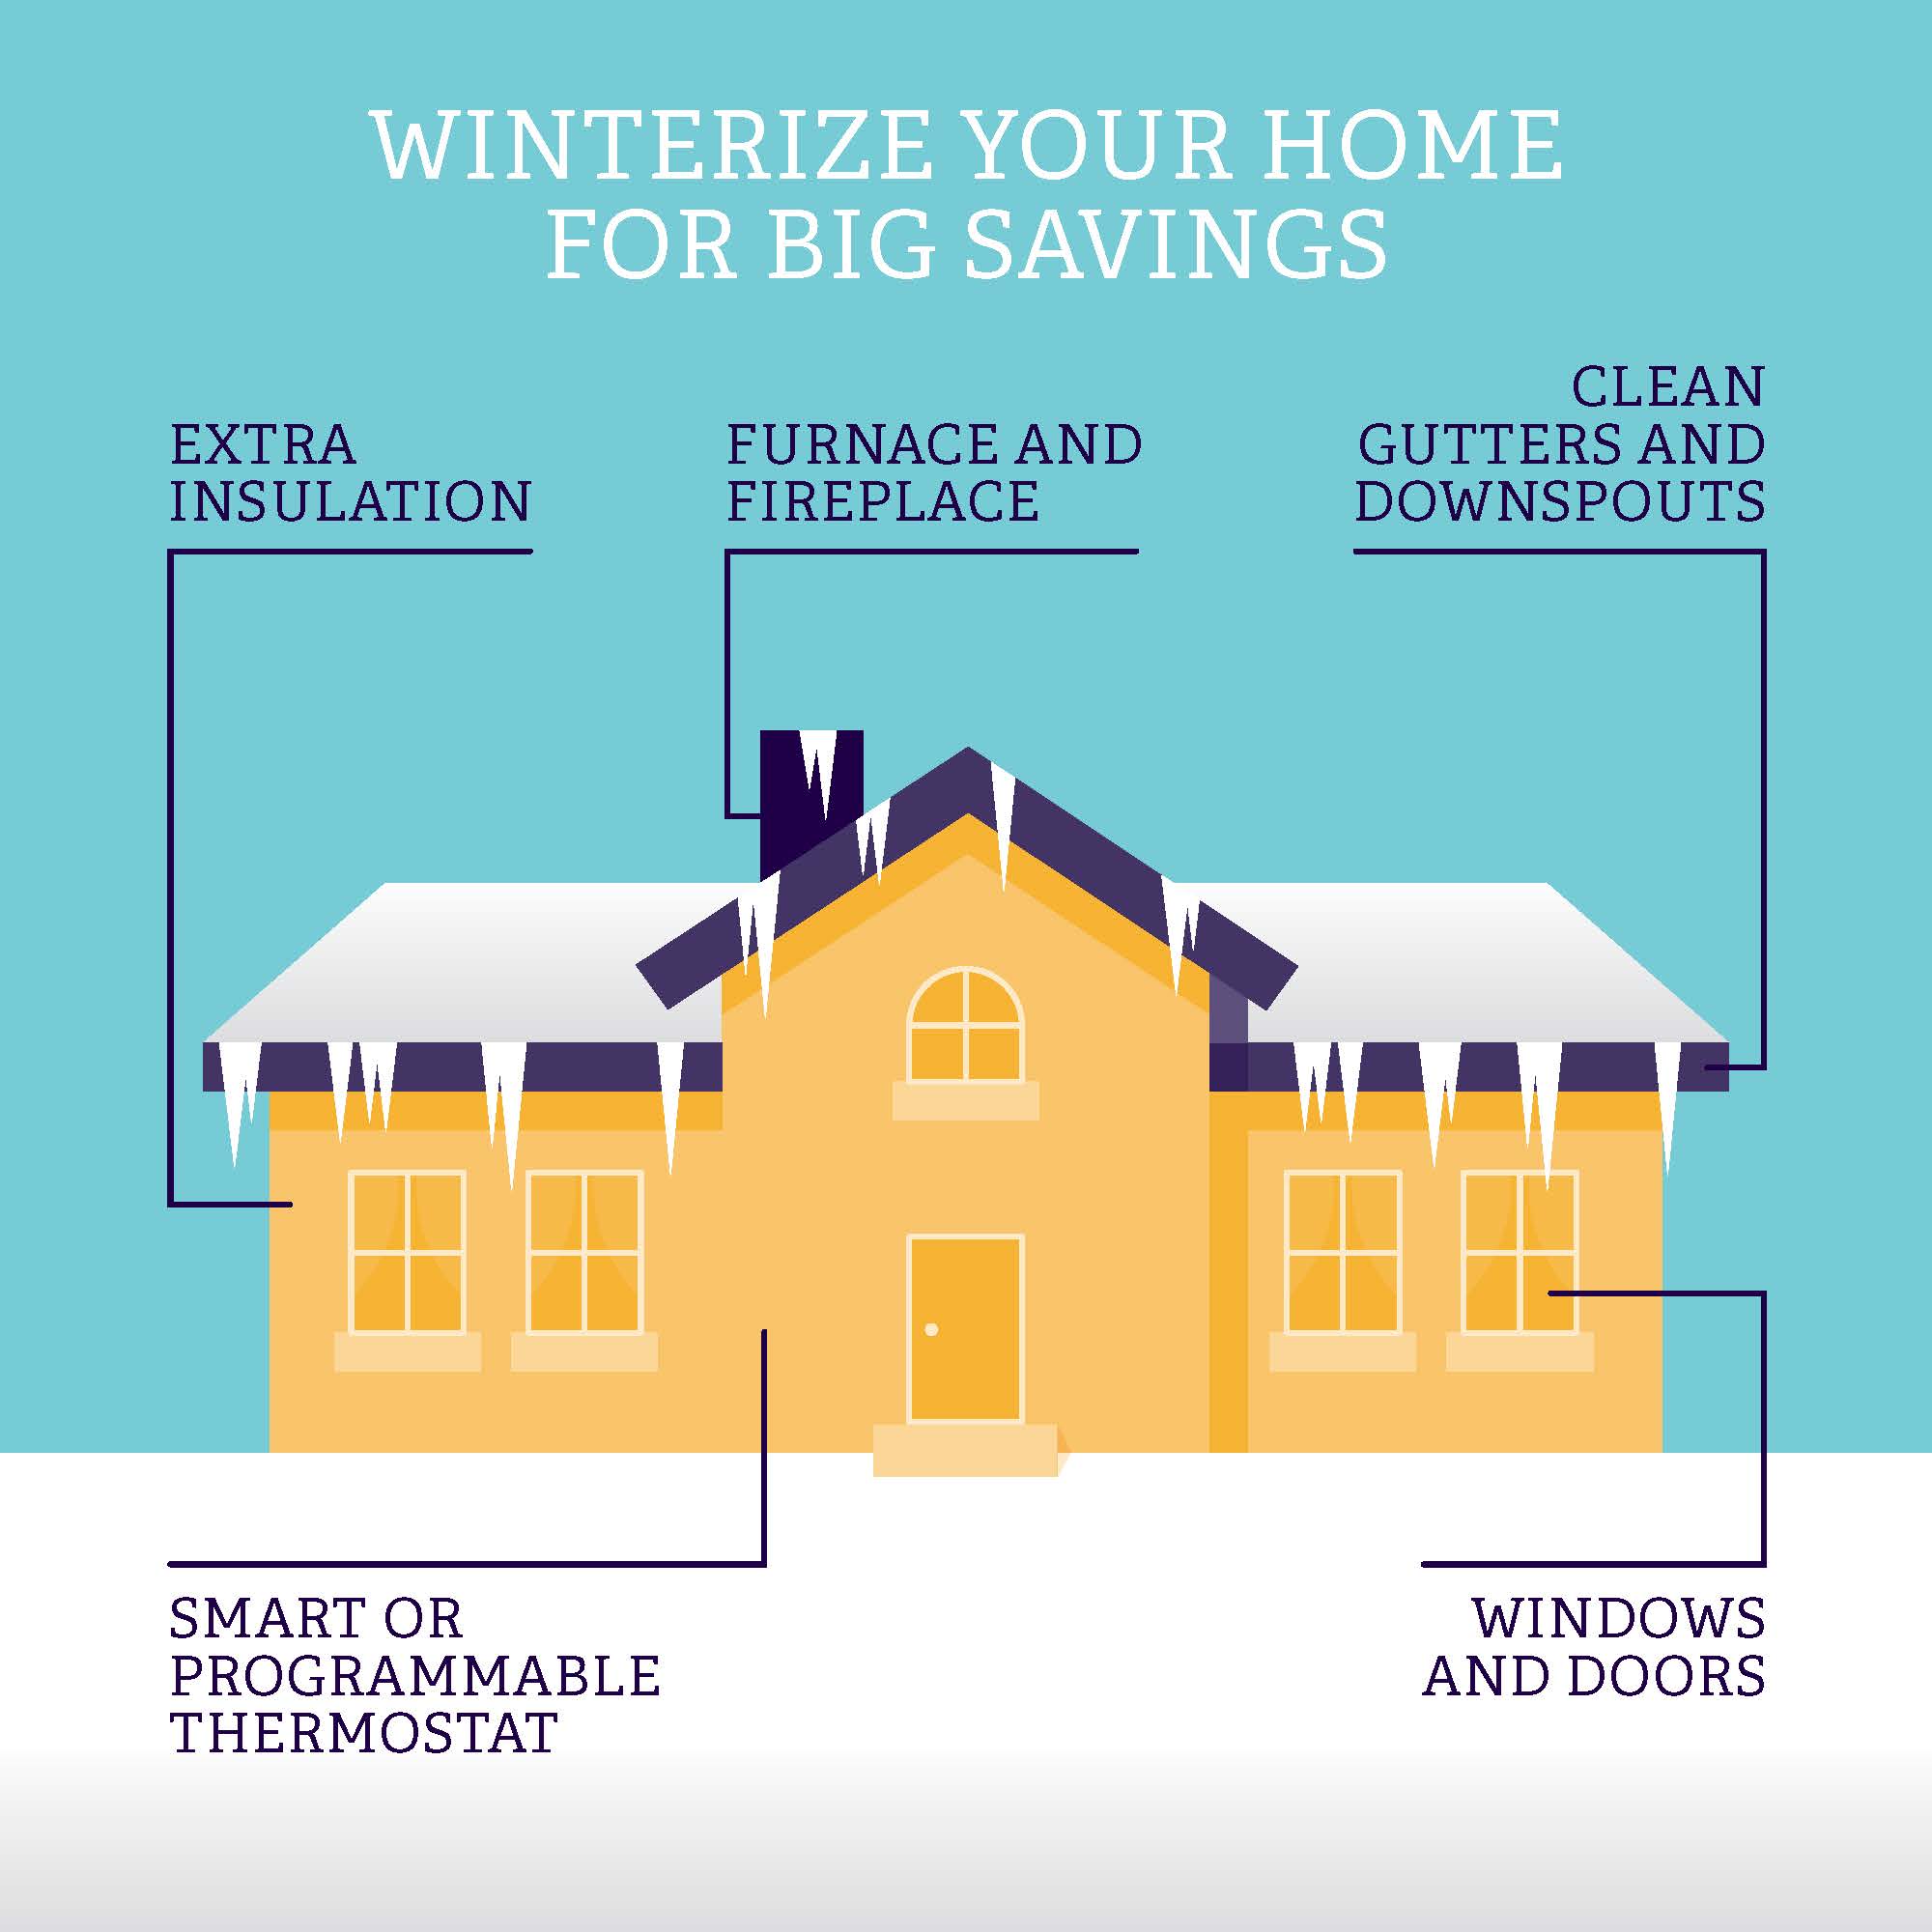 Winterize your home before the cold hits. Small upgrades can make a big difference. 